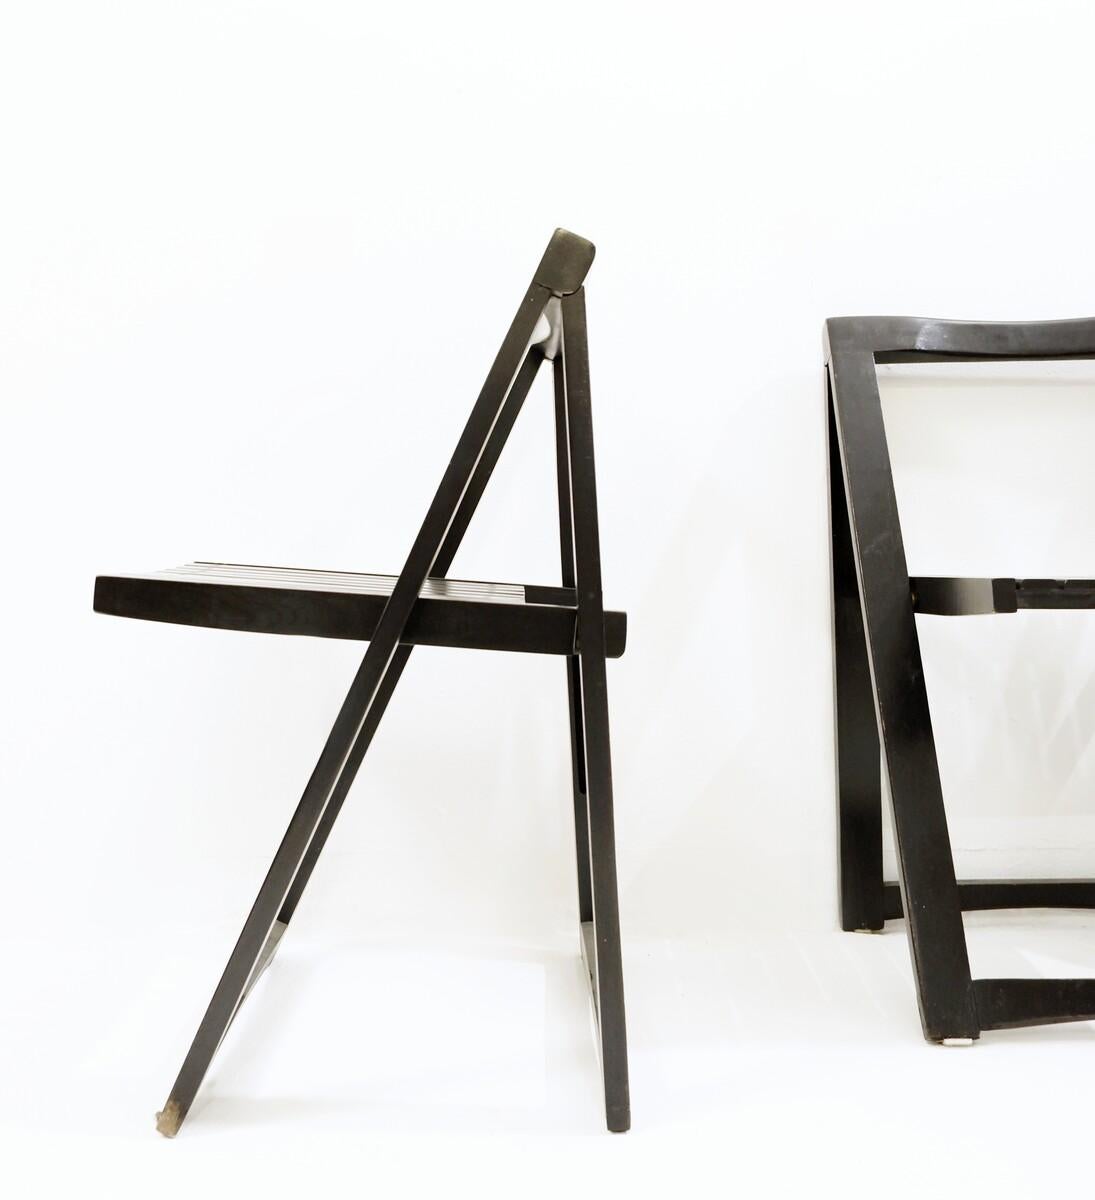 20th Century Set of 4 Folding Chairs by Aldo Jacober